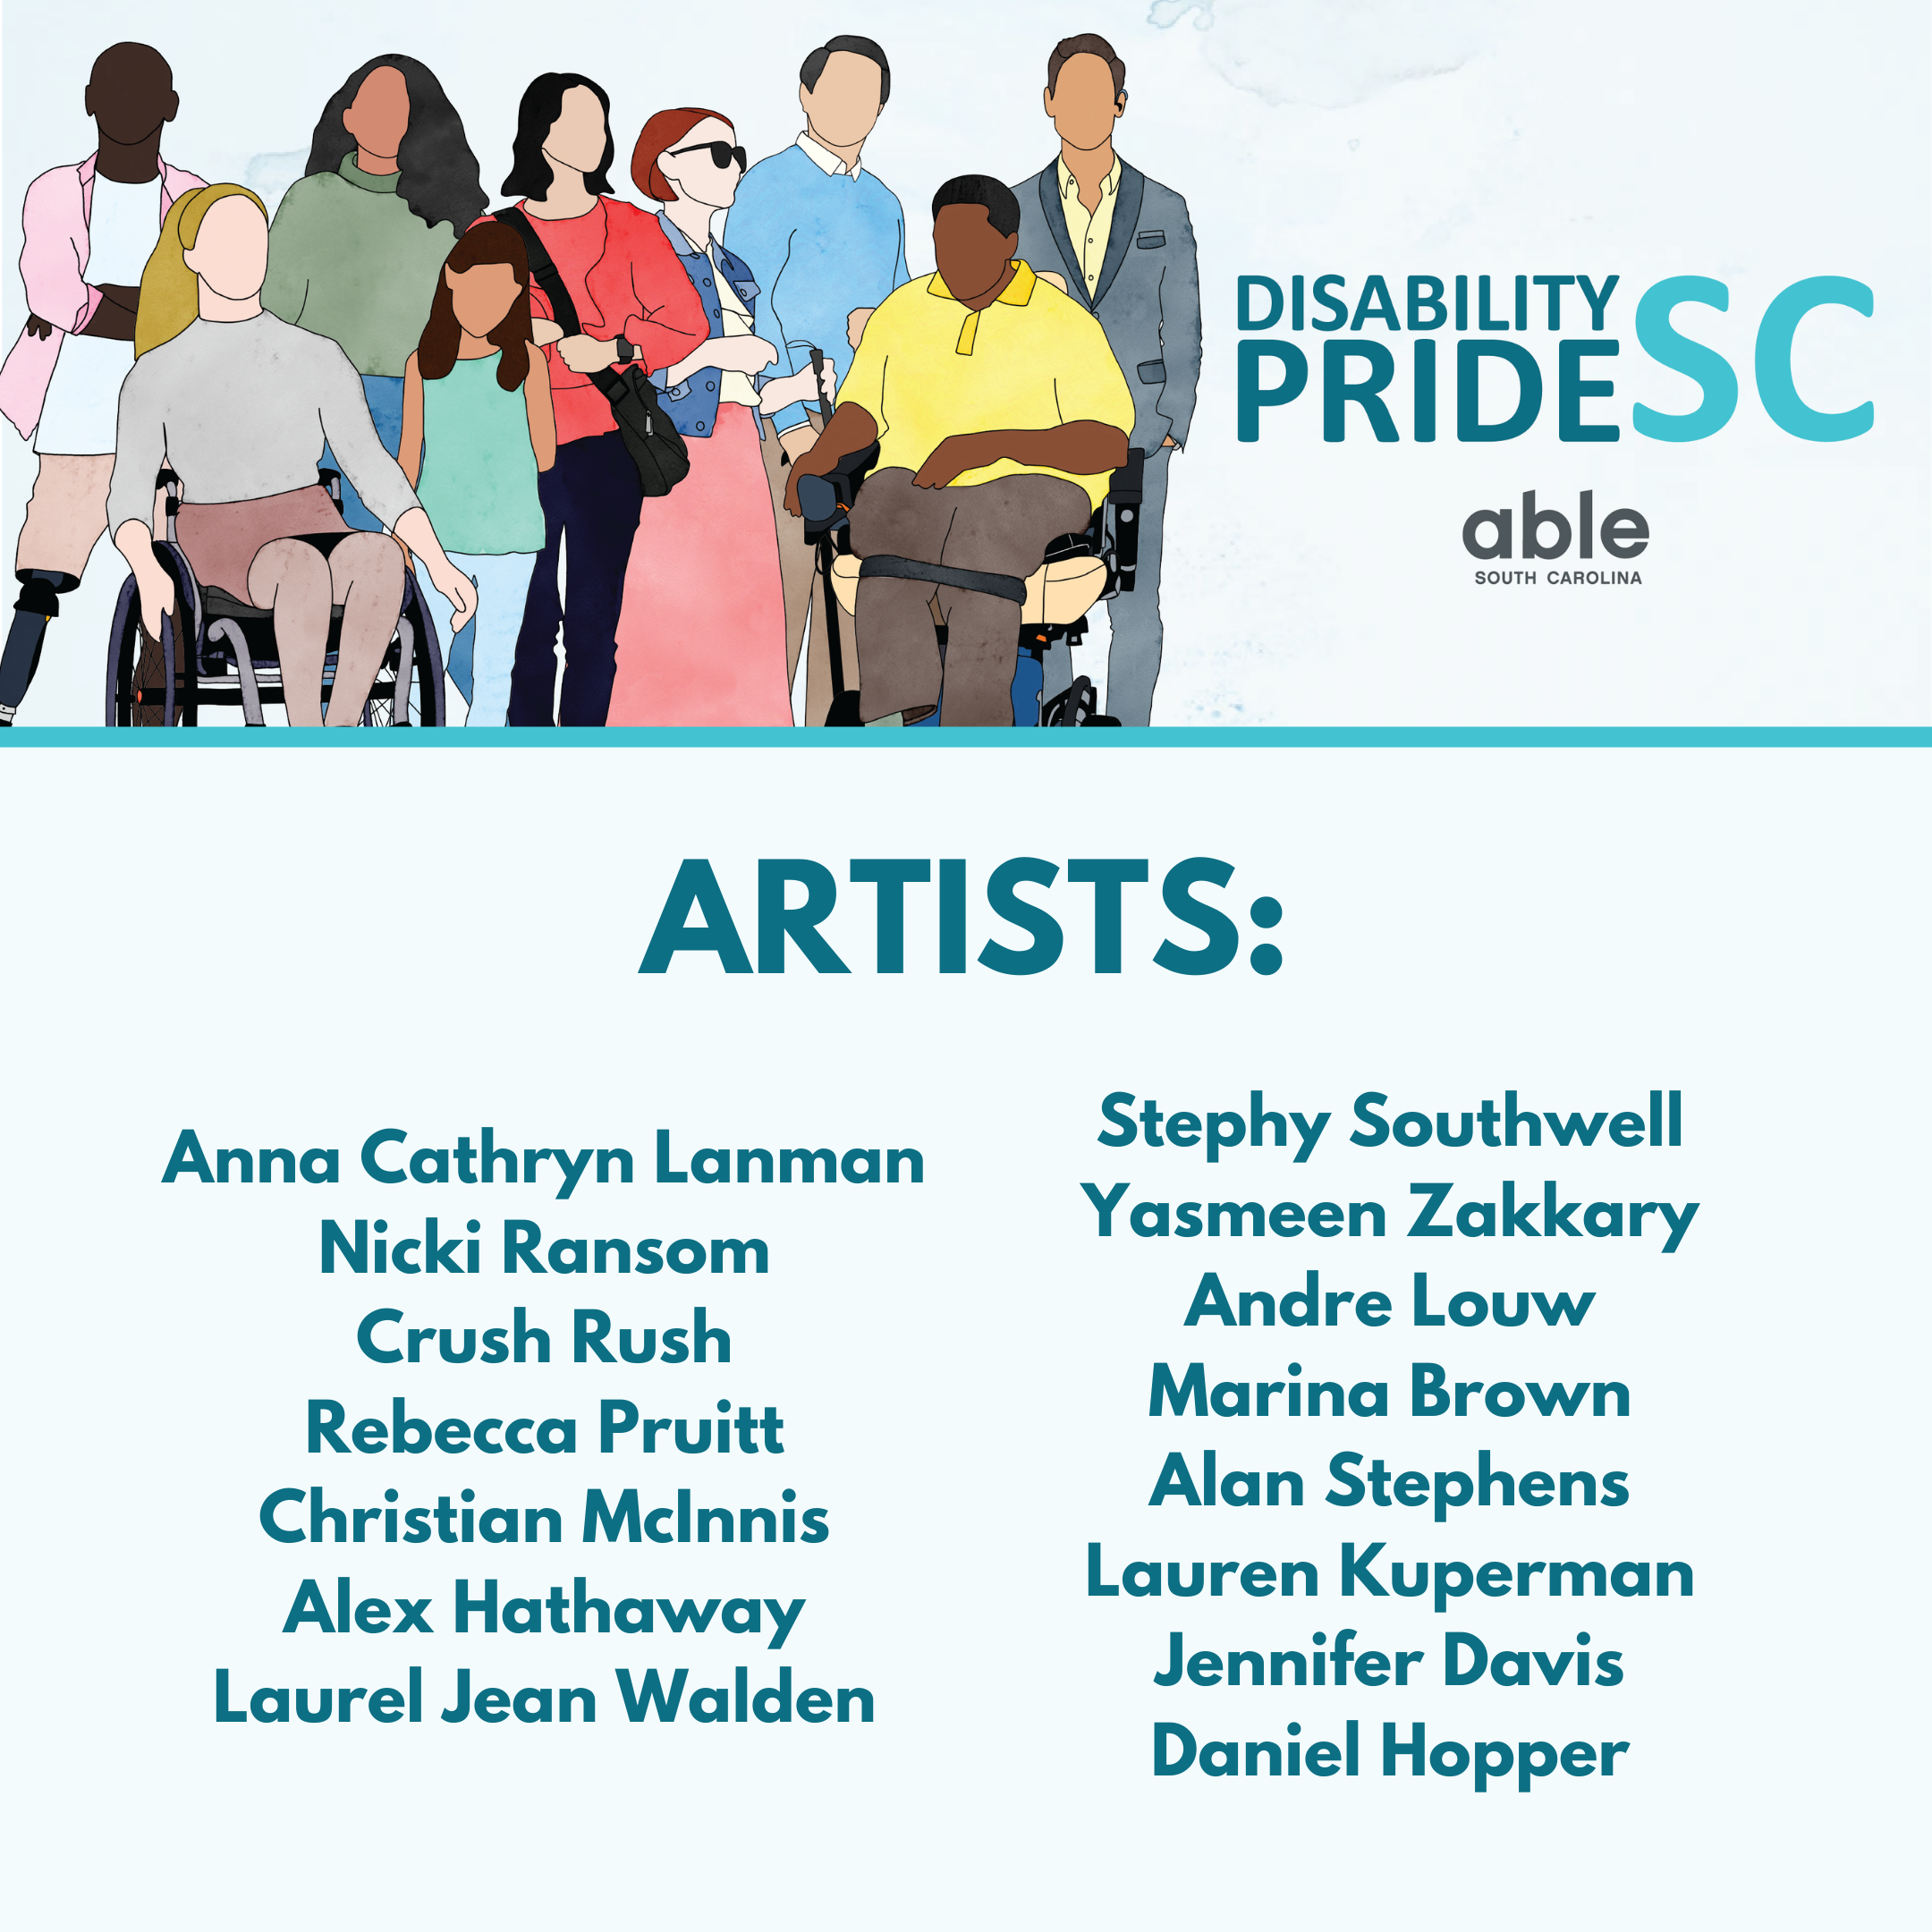 On the left is an illustration of 9 diverse people with various disabilities. On the right in teal is the text 'Disability Pride SC' with the Able SC logo below it. Below is a light teal line, followed by dark teal text that says: ARTISTS; Anna Cathryn Lanman, Nicki Ransom, Crush Rush, Rebecca Pruitt, Christian McInnis, Alex Hathaway, Laurel Jean Walden, Stephy Southwell, Yasmeen Zakkary, Andre Louw, Marina Brown, Alan Stephens, Lauren Kuperman, Jennifer Davis, Daniel Hopper